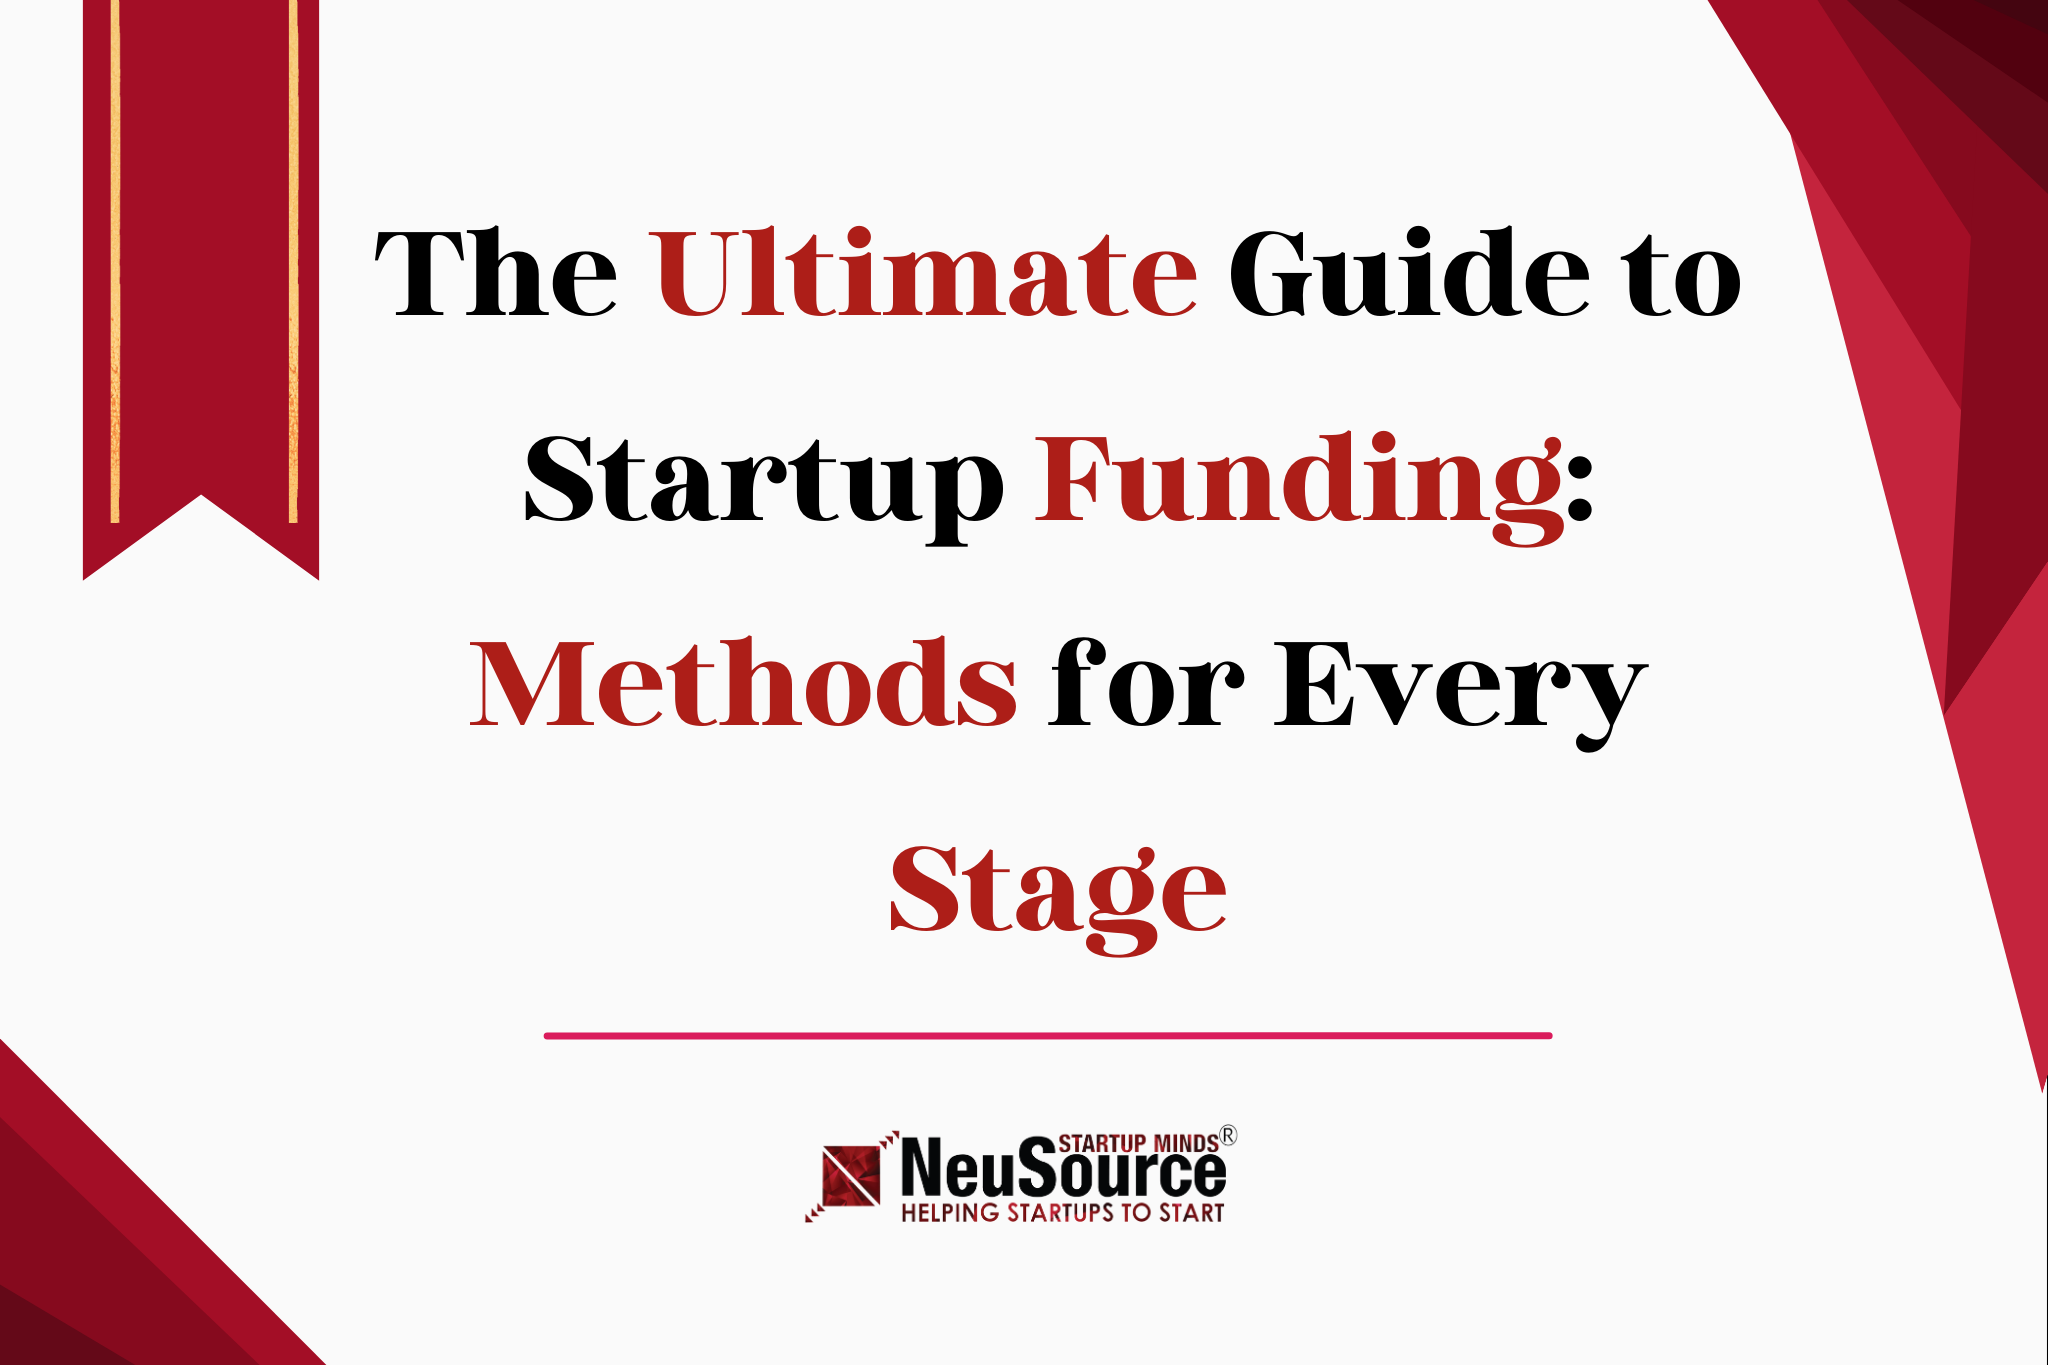 The Ultimate Guide to Startup Funding Stages 